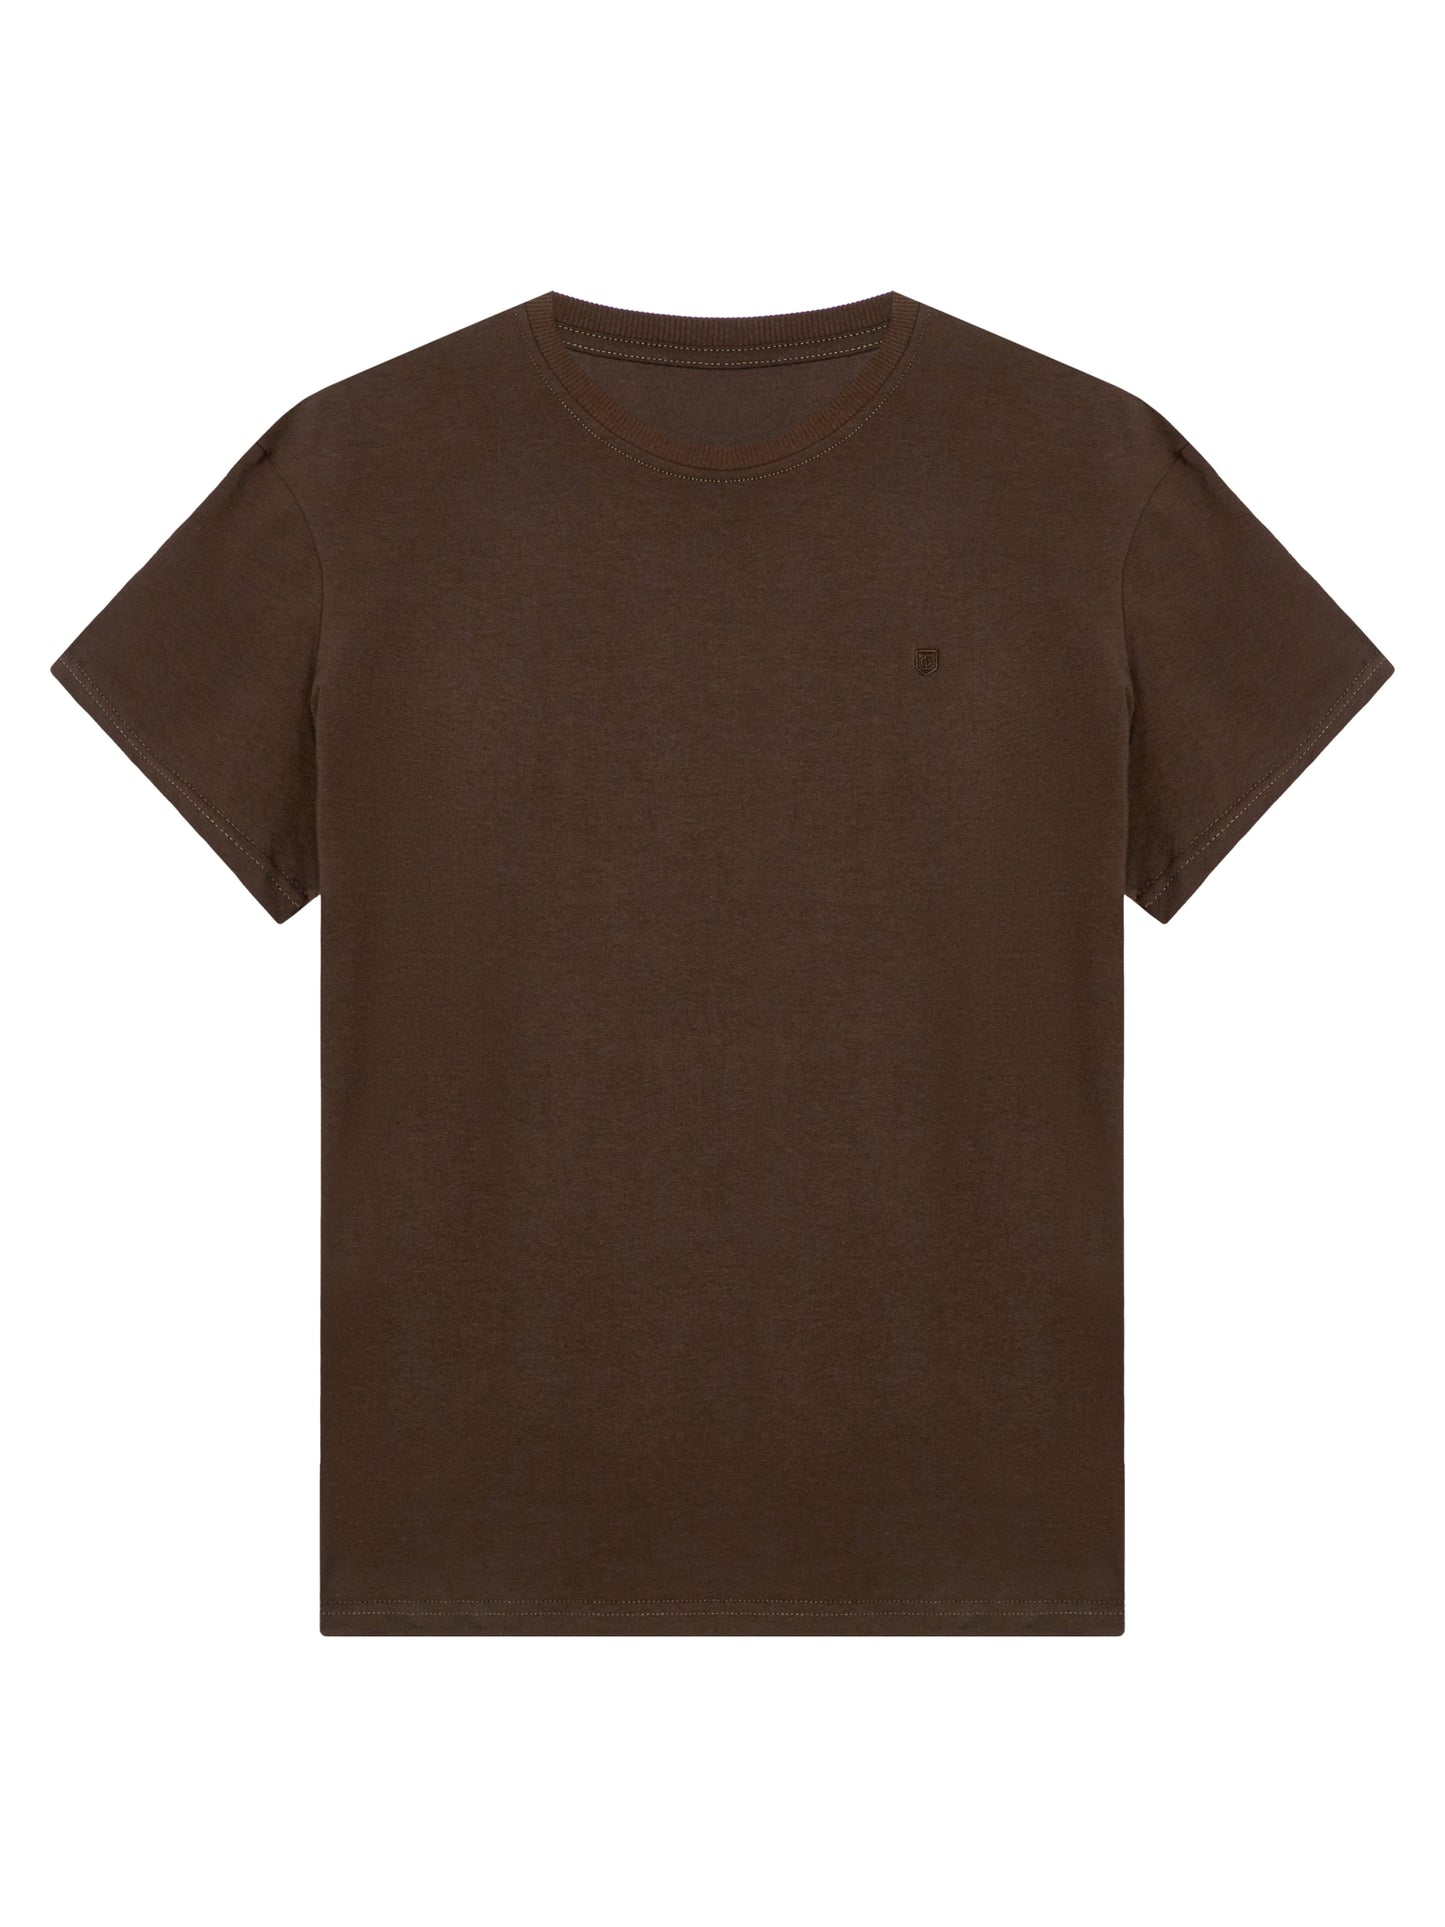 Brown T-shirt INDPOSHIV CASUAL